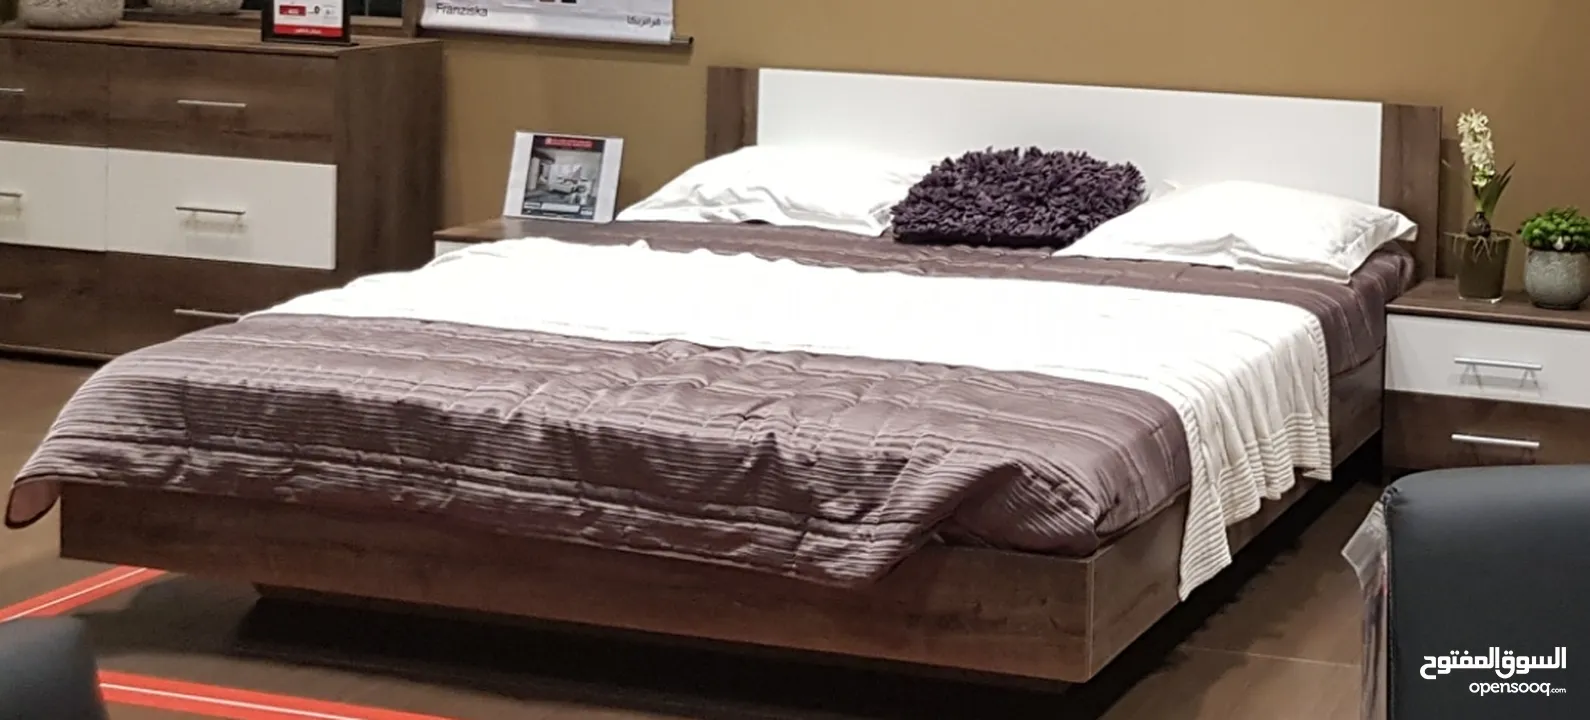 Used double bed for sale